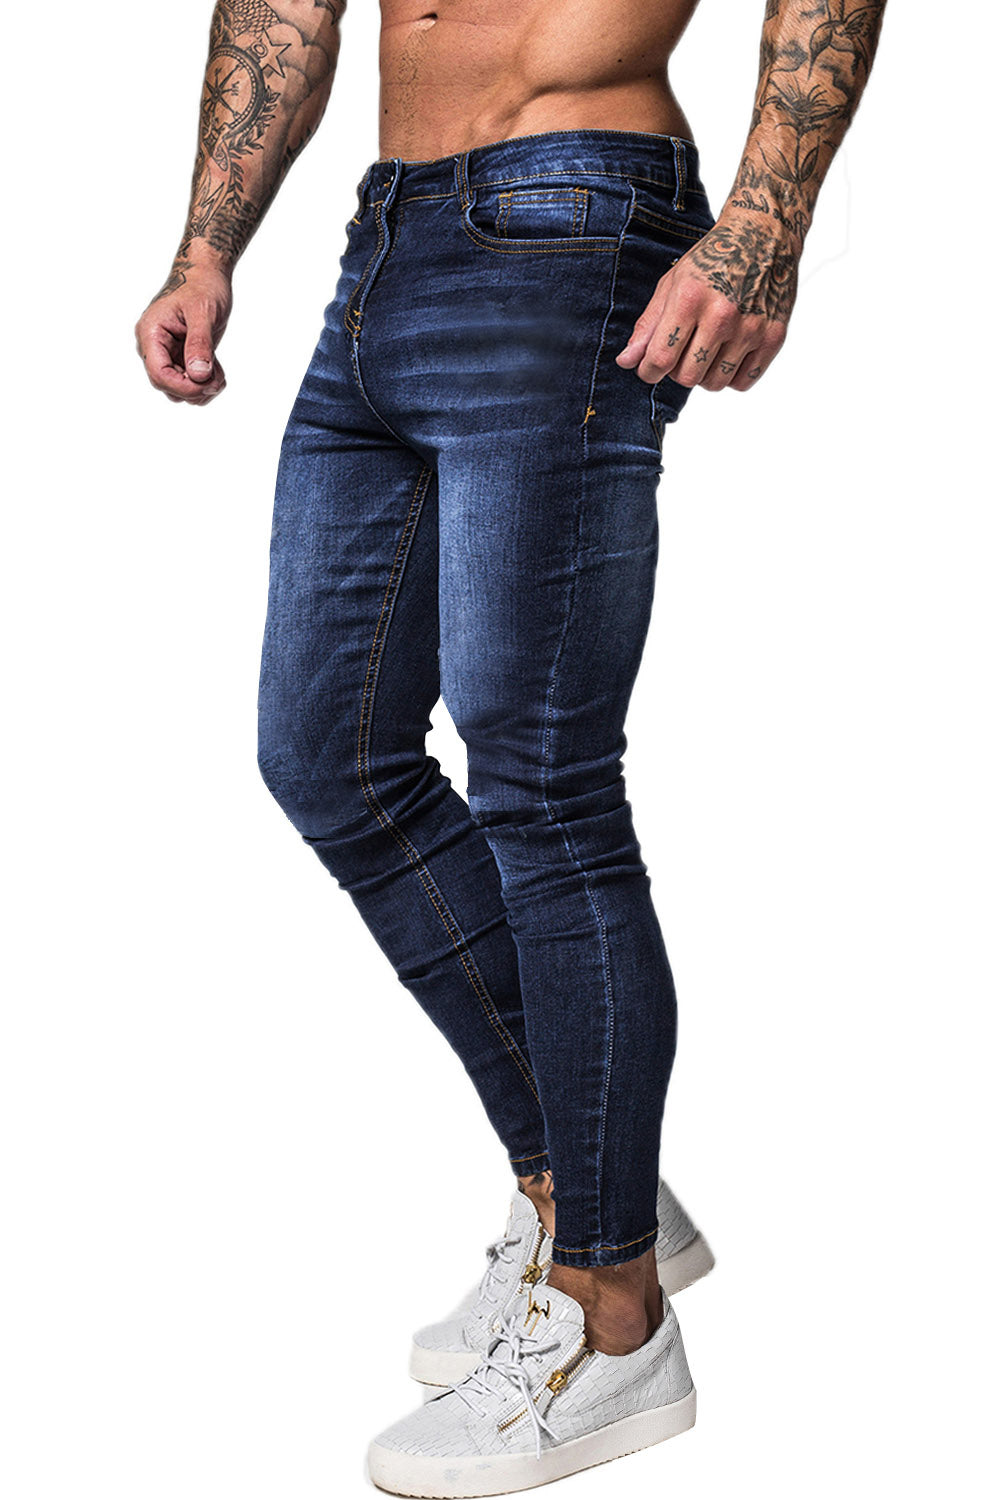 Gingtto Super Skinny Durable Jeans Blue Stretch Jeans For Men